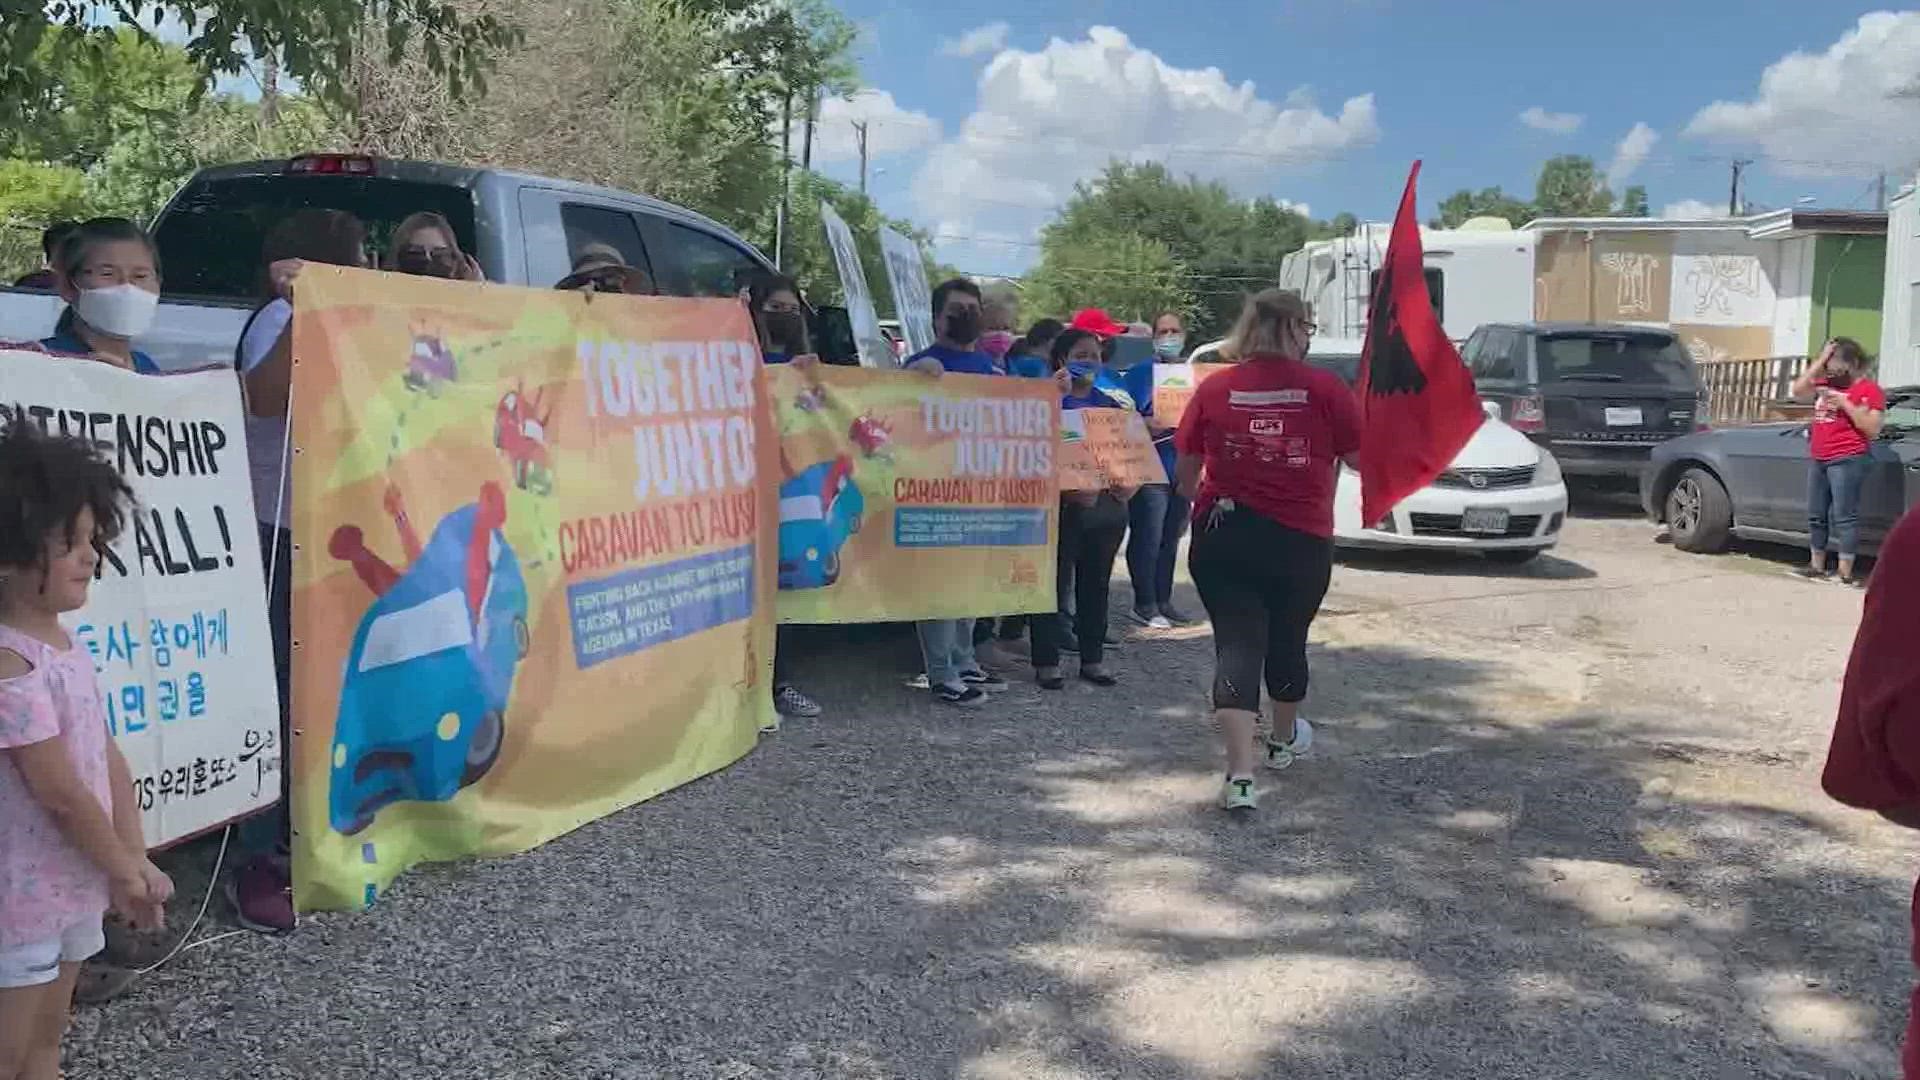 Along the way, the caravan is raising their voices against what they call Governor Greg Abbott’s attack on immigrants.